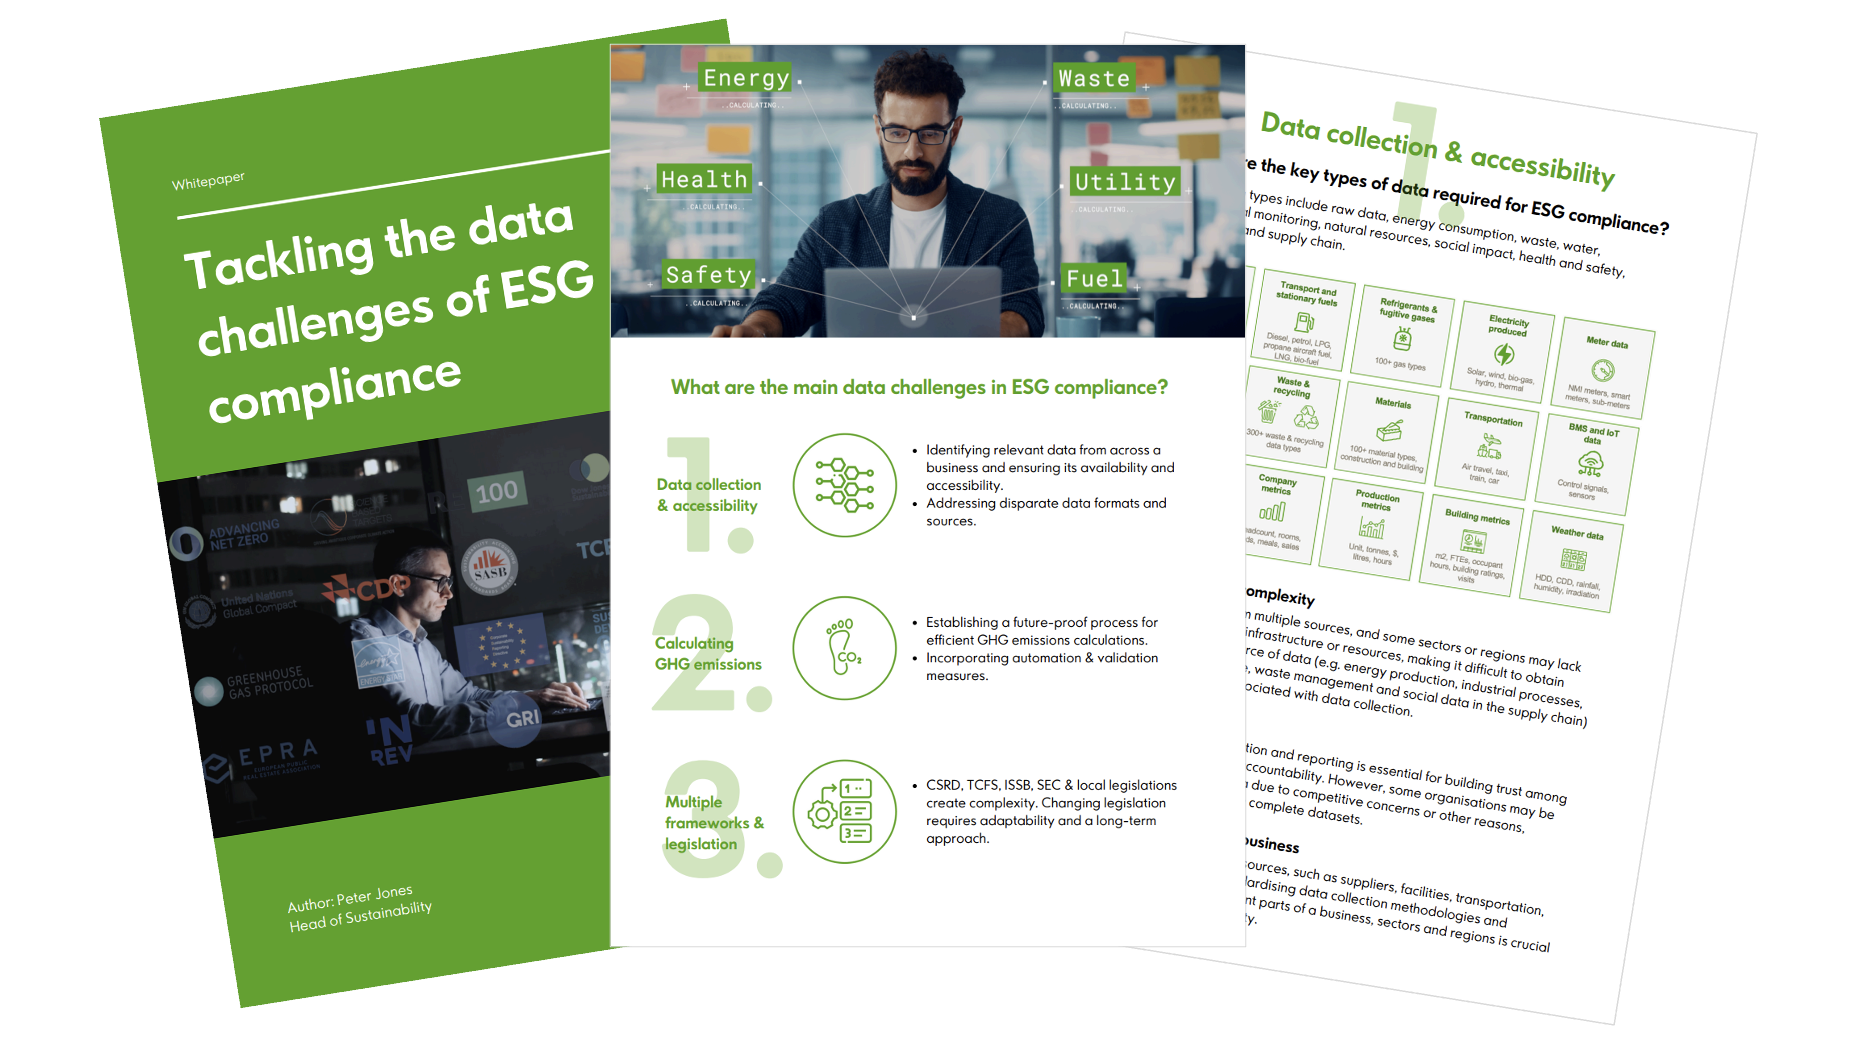 Whitepaper tackling the data challenges of ESG compliance